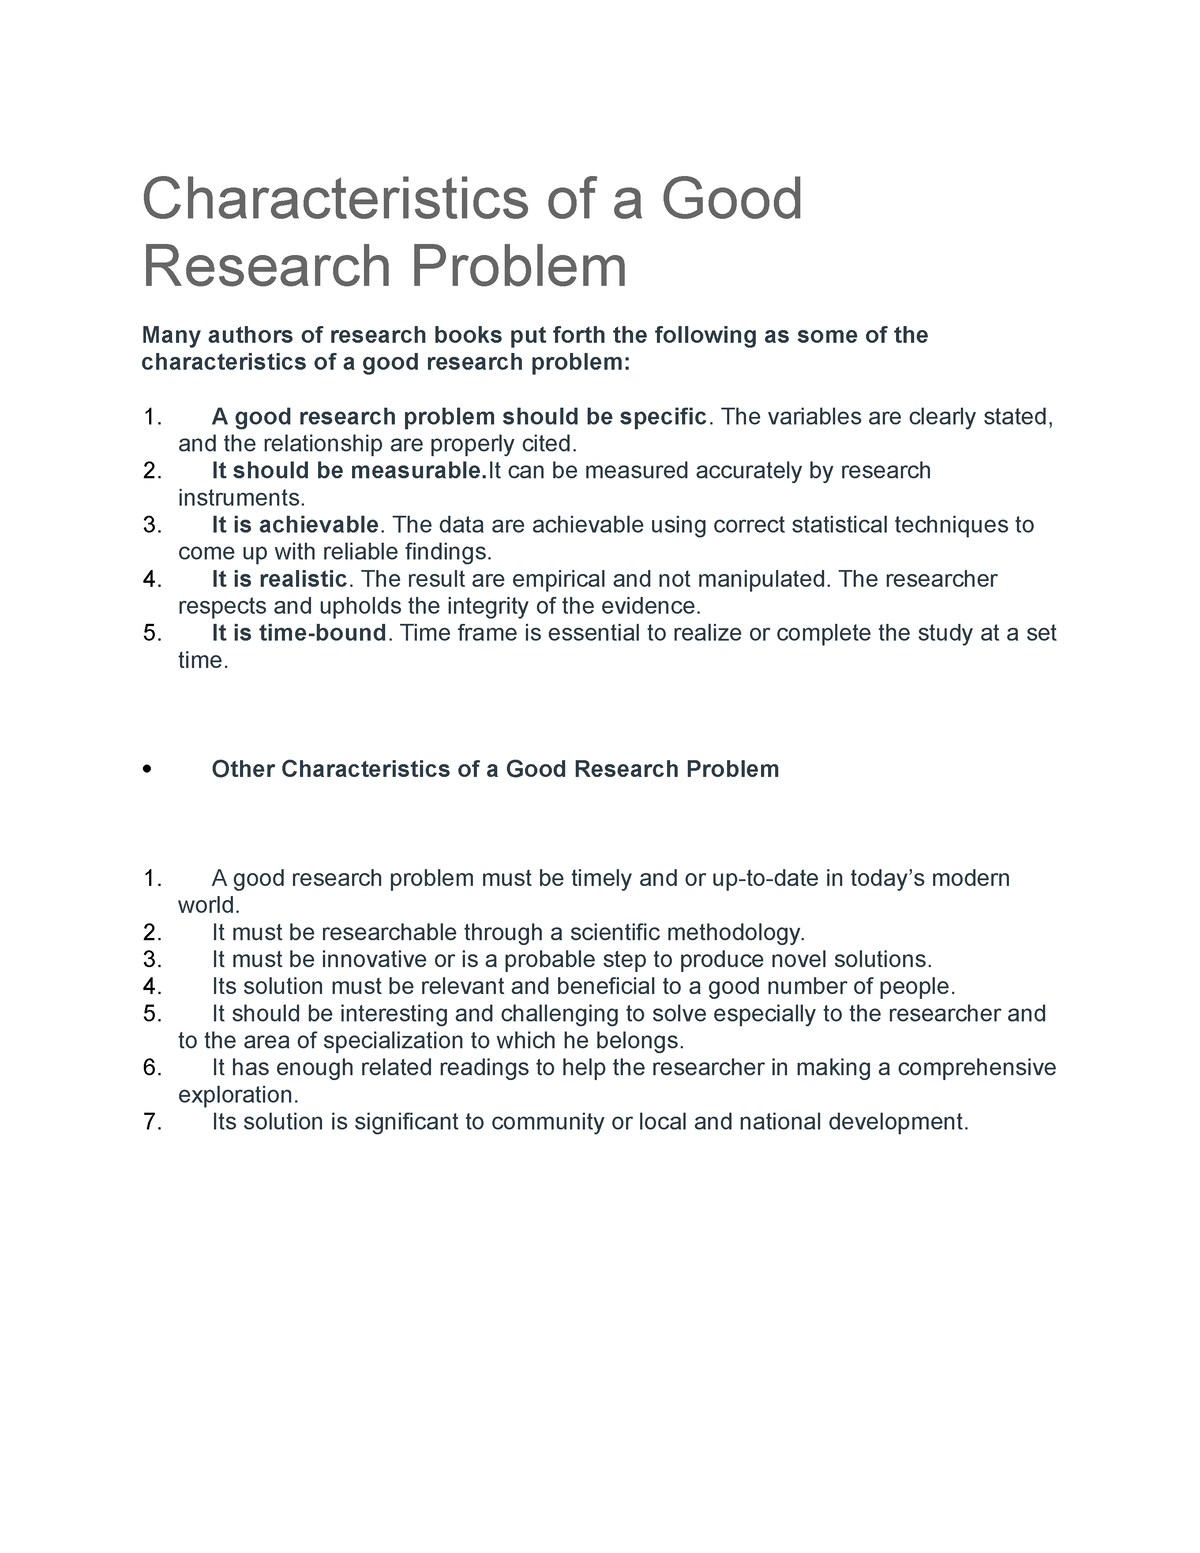 characteristic of a research problem